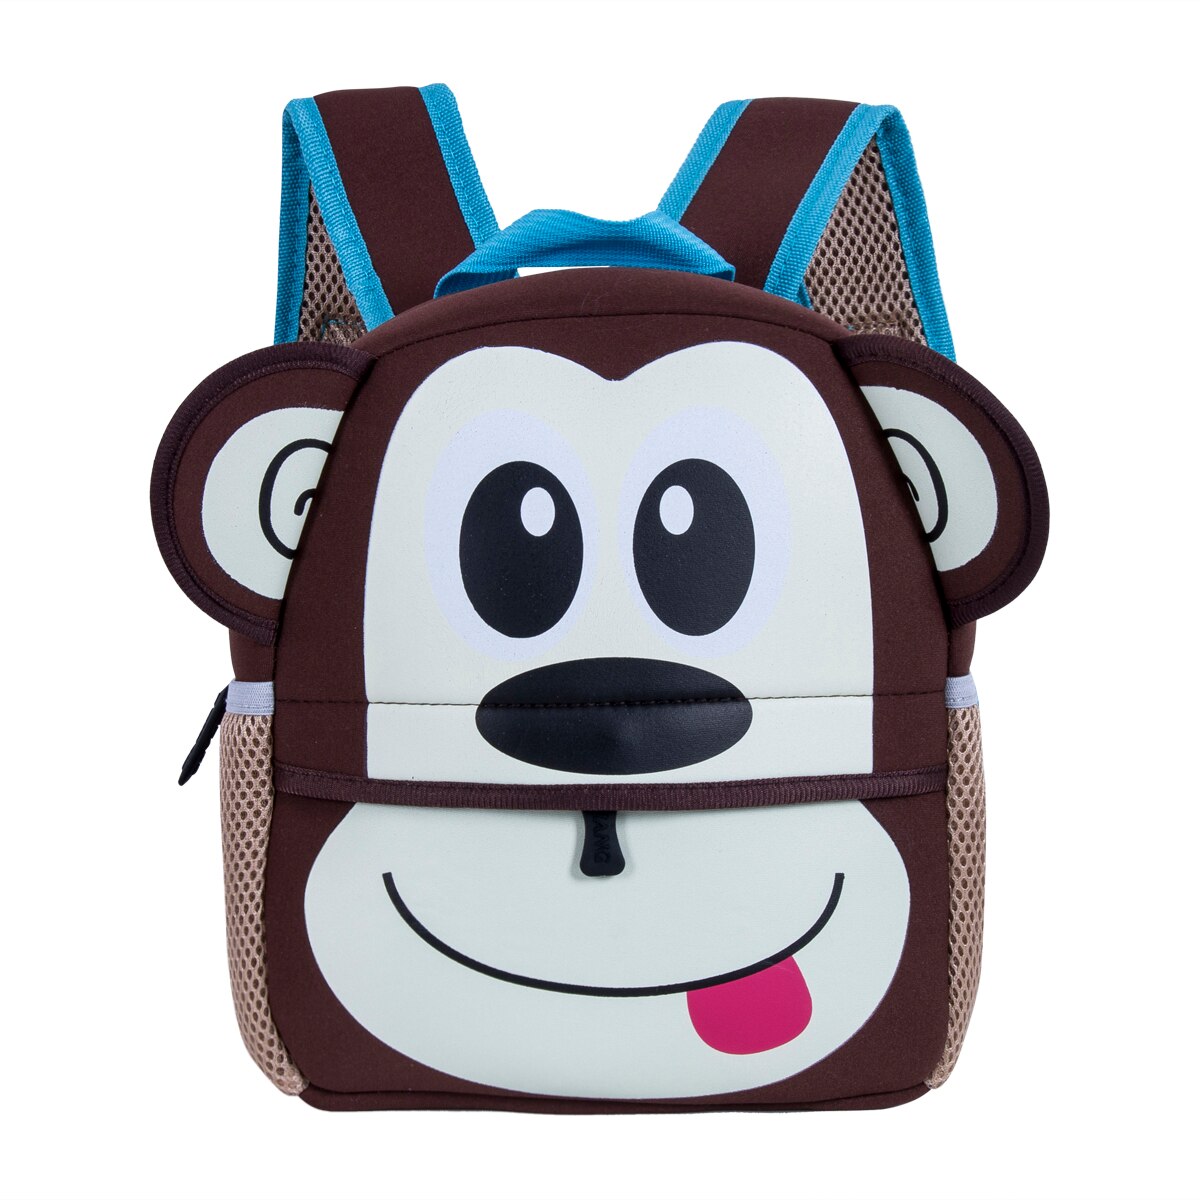 3D Cute Animal Backpack For Children – My Heart Teddy